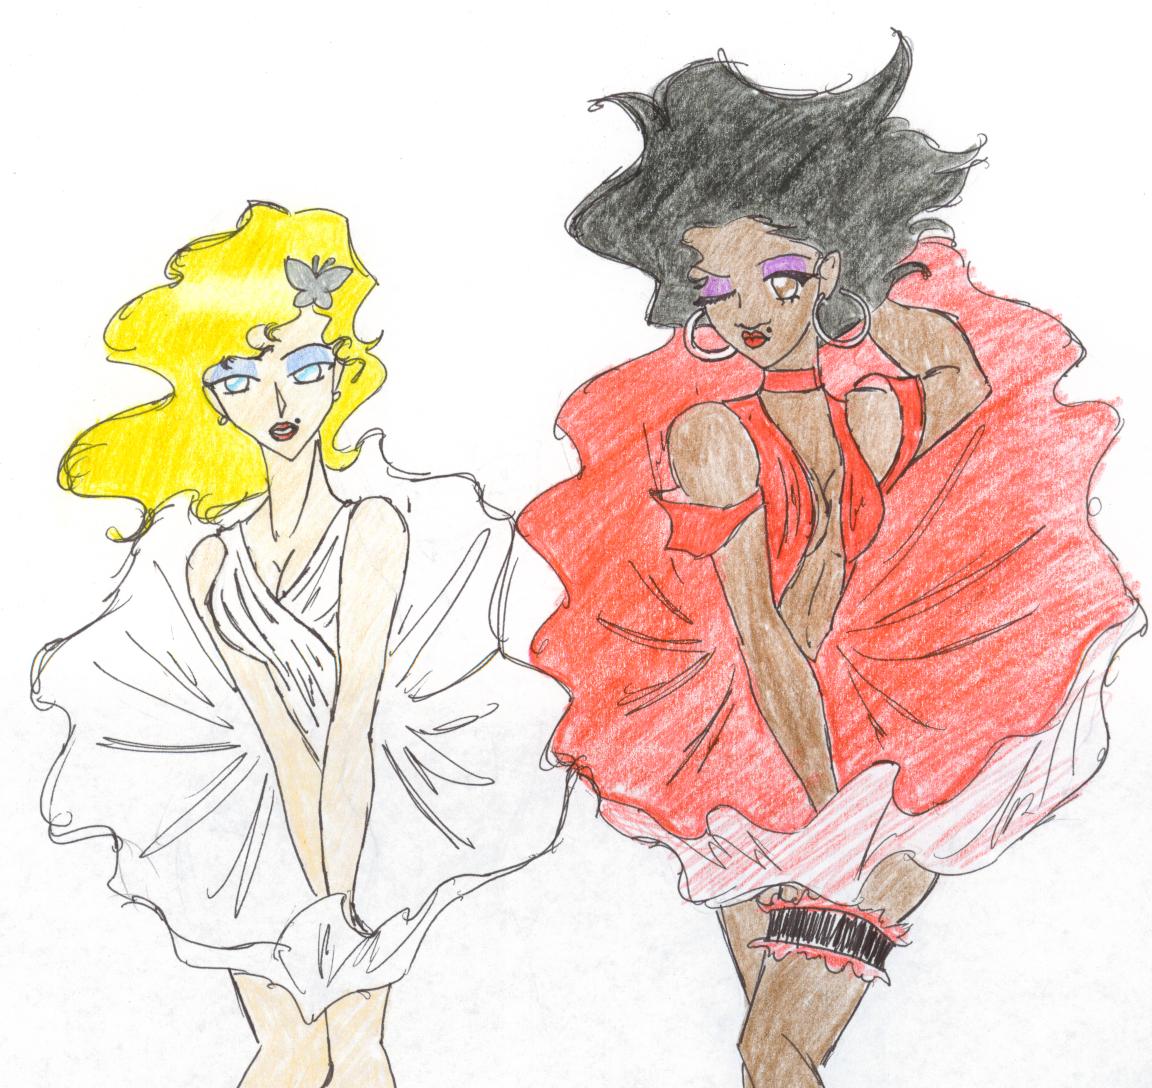 terra and bumblebee monroe by Purely_coincidental